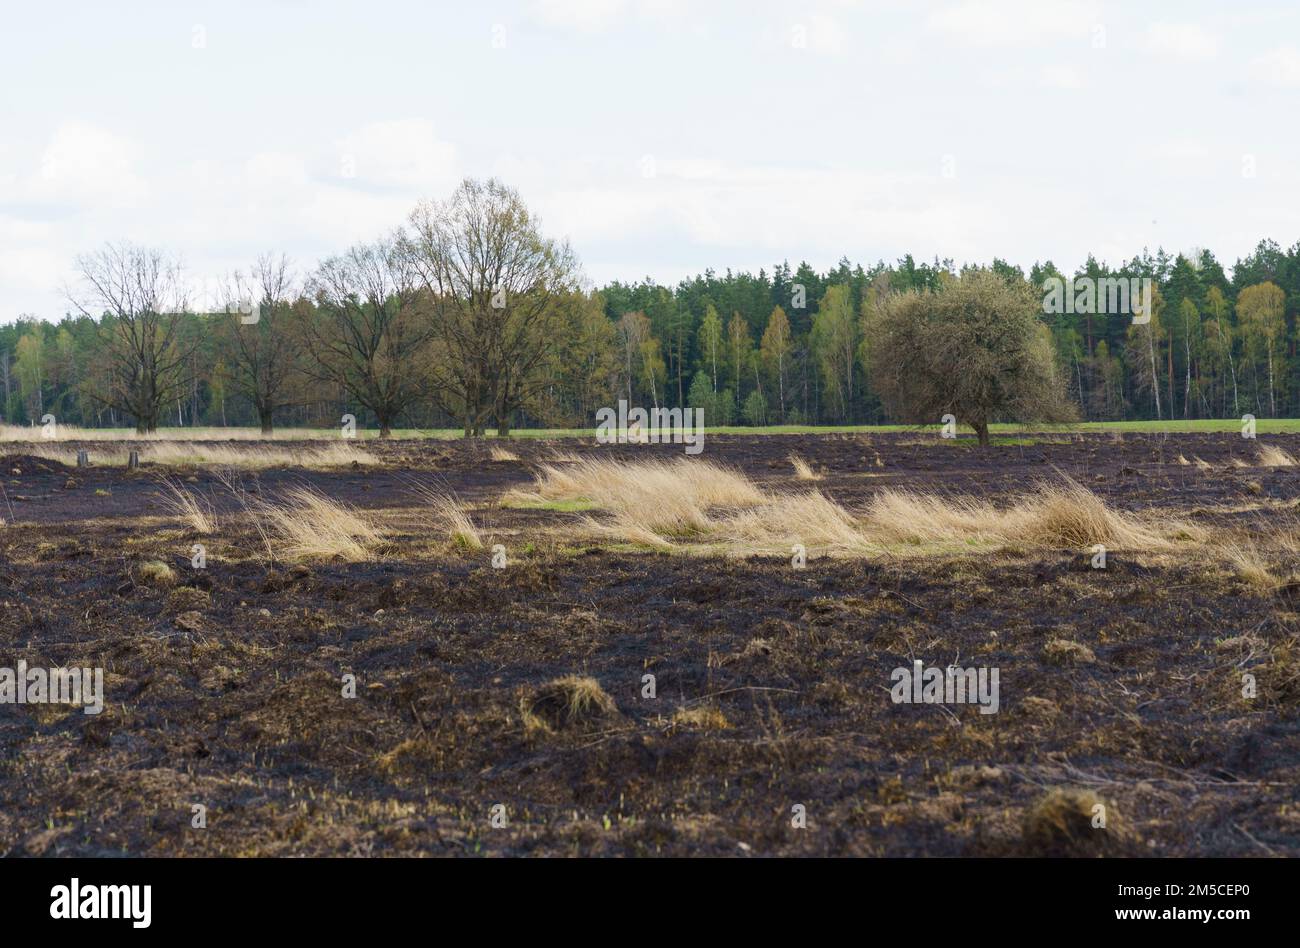 Ecological catastrophy. View of a field with scorched grass, a forest in the distance. Stock Photo